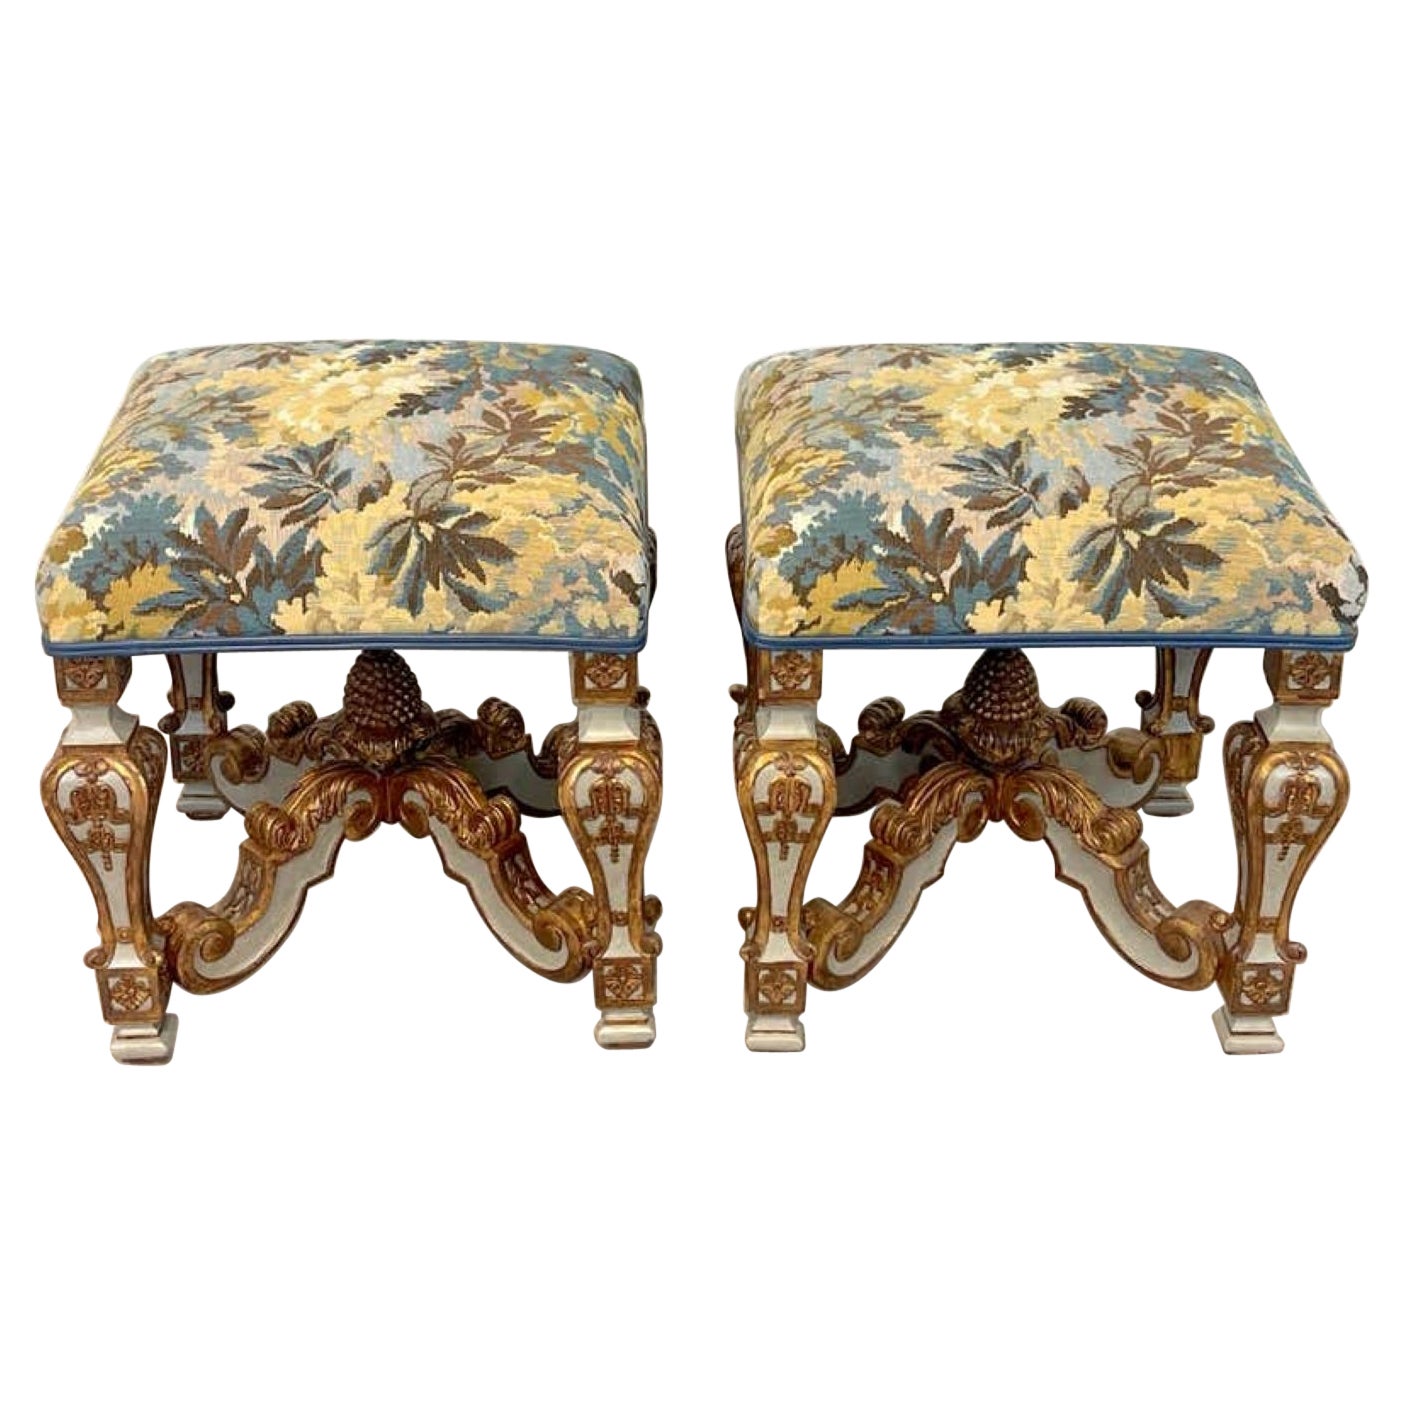 Pair of Flemish-Style Benches / Tabourets